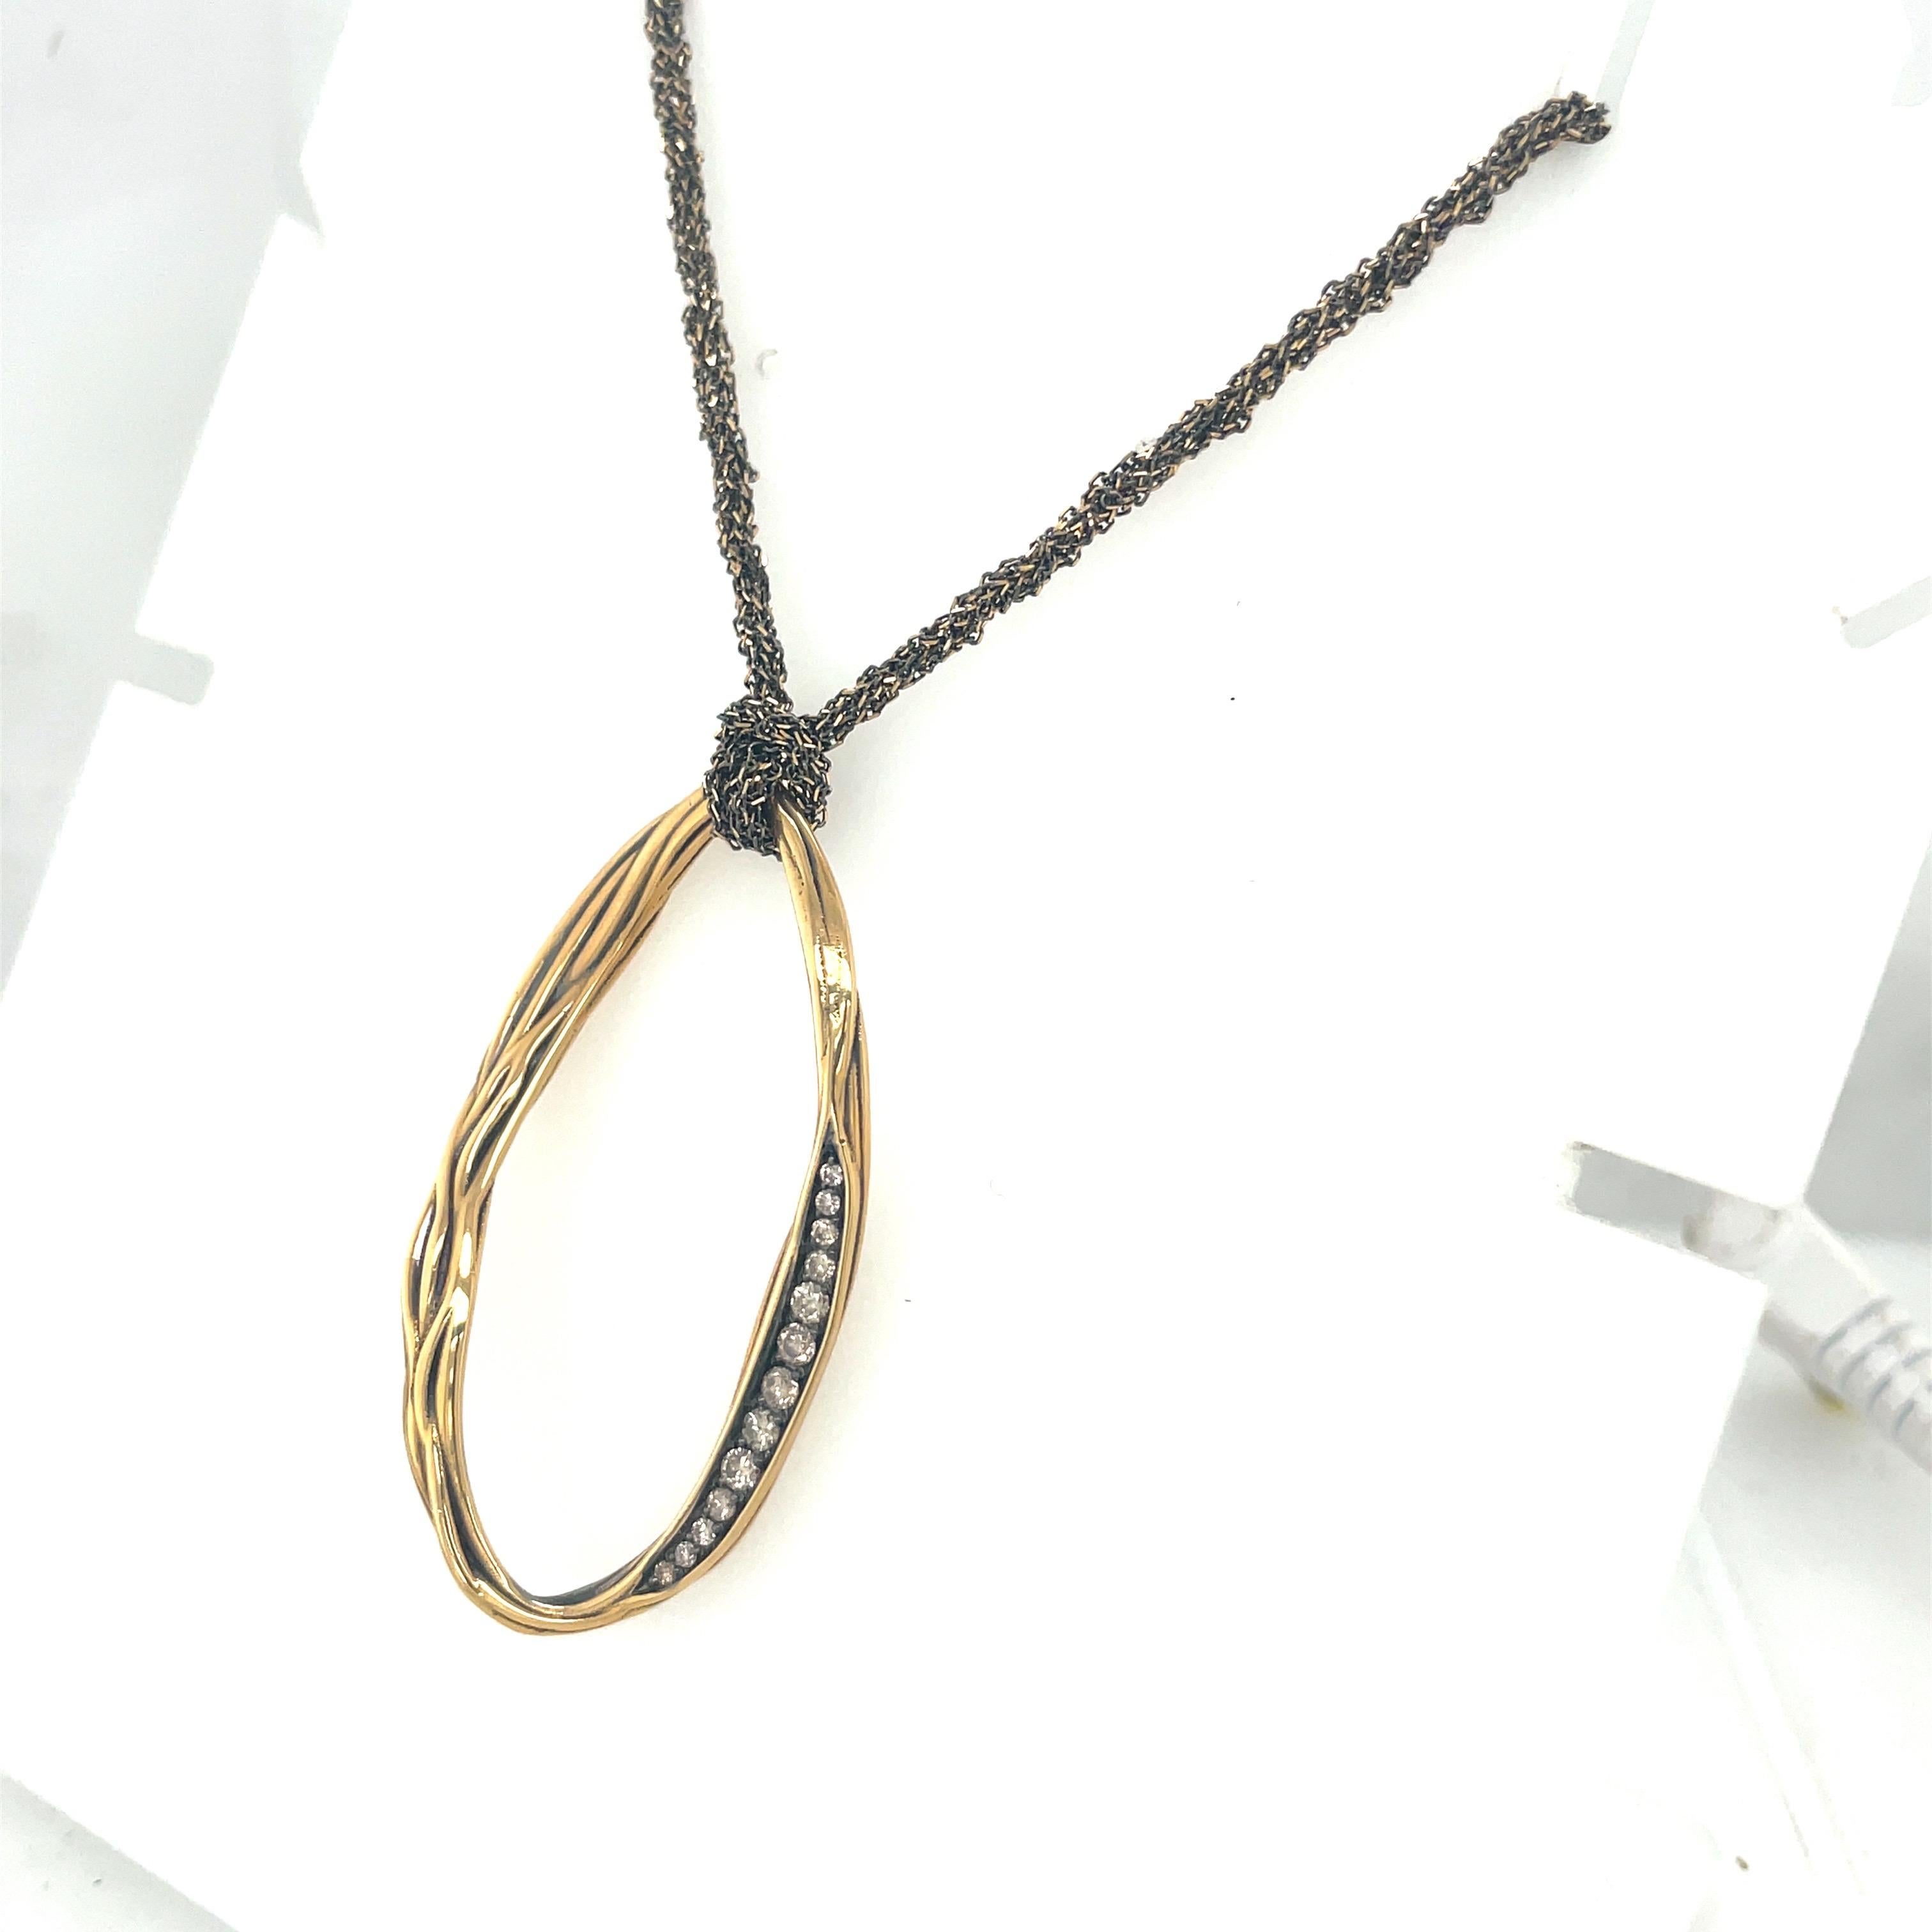 Since 1919, ANTONINI has been creating timeless jewellery using top-quality craftsmanship and sophisticated designs.
This 18 karat yellow gold pendant necklace is a perfect example of their unique style. An organic oval shape is set with 0.29 carats